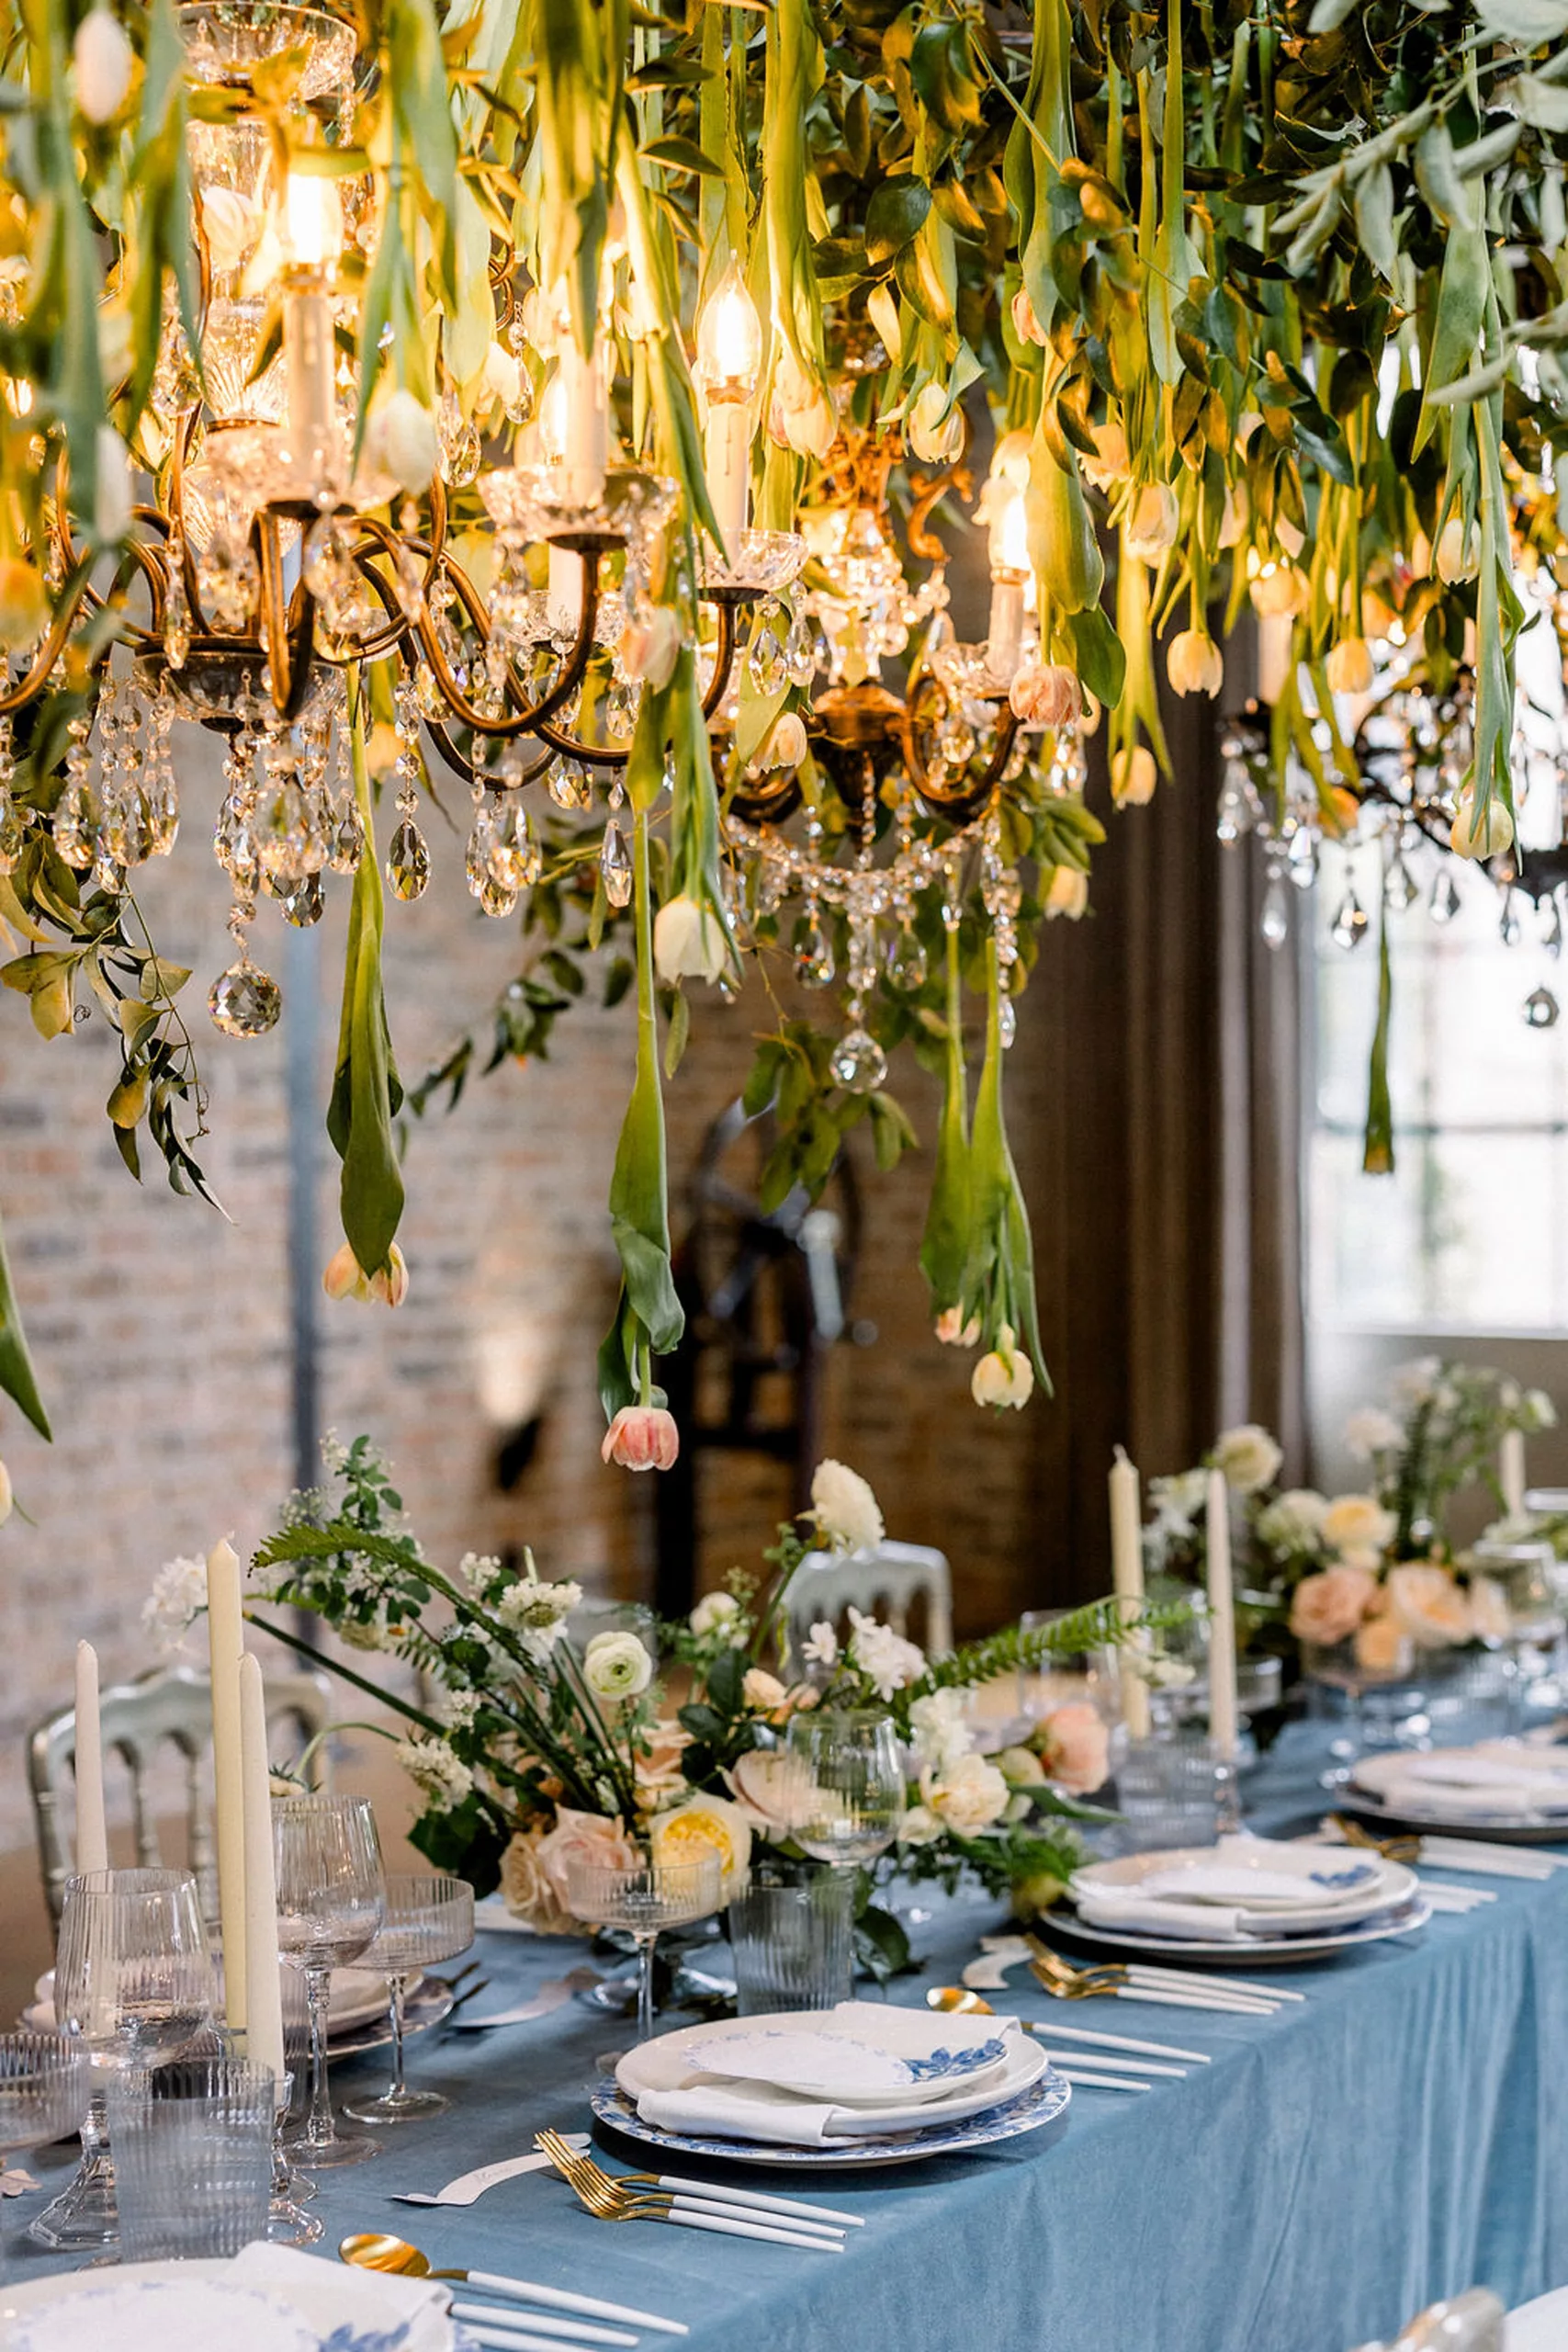 Details of a wedding reception table set up underneath floating tulips around chandeliers